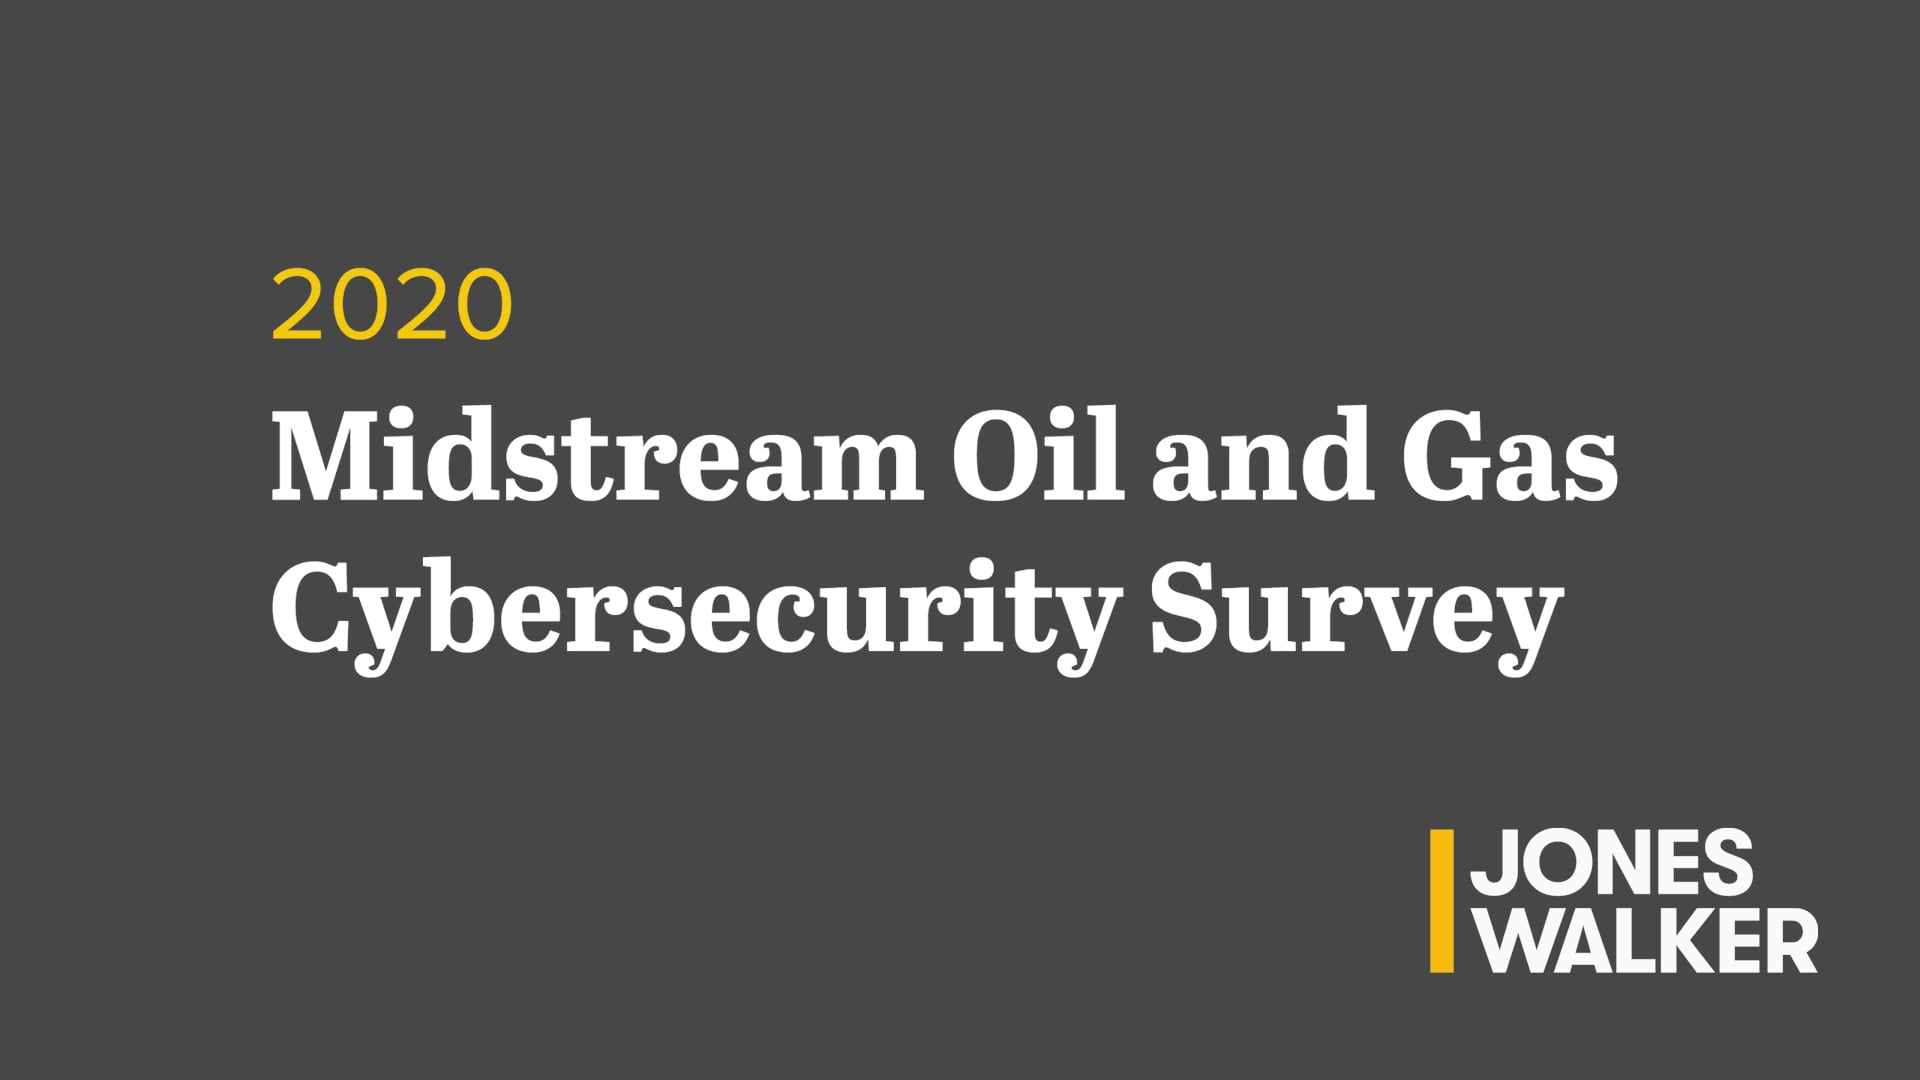 Play Video: Video featuring Andy Lee, Krystal Scott, and Ewaen Woghiren discussing the Midstream Oil and Gas Cybersecurity Survey